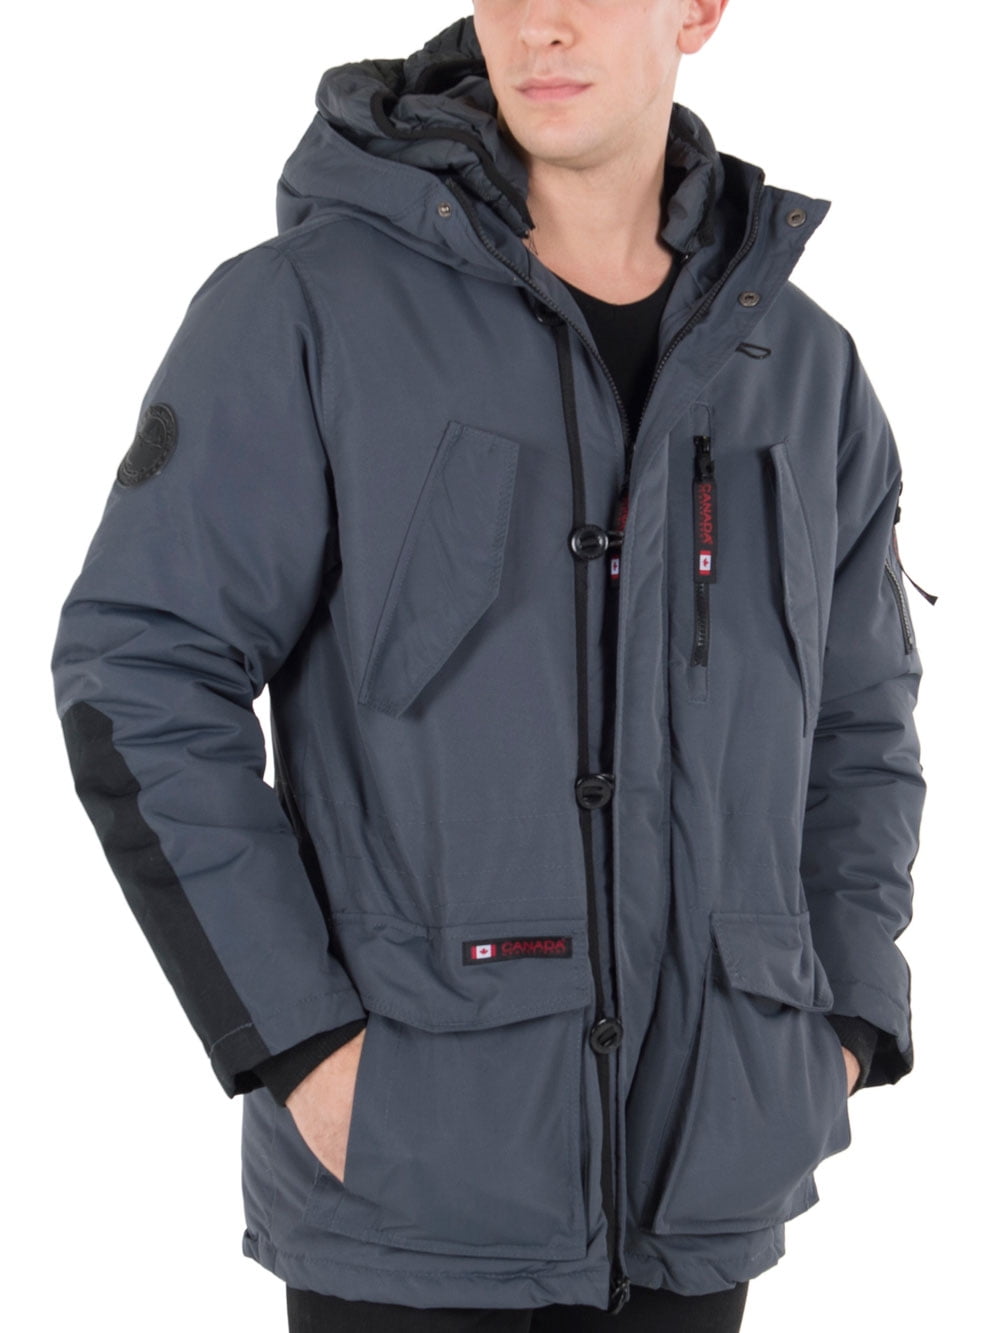 Canada Weather Gear Men's Insulated Parka - charcoal gray, 2xl ...